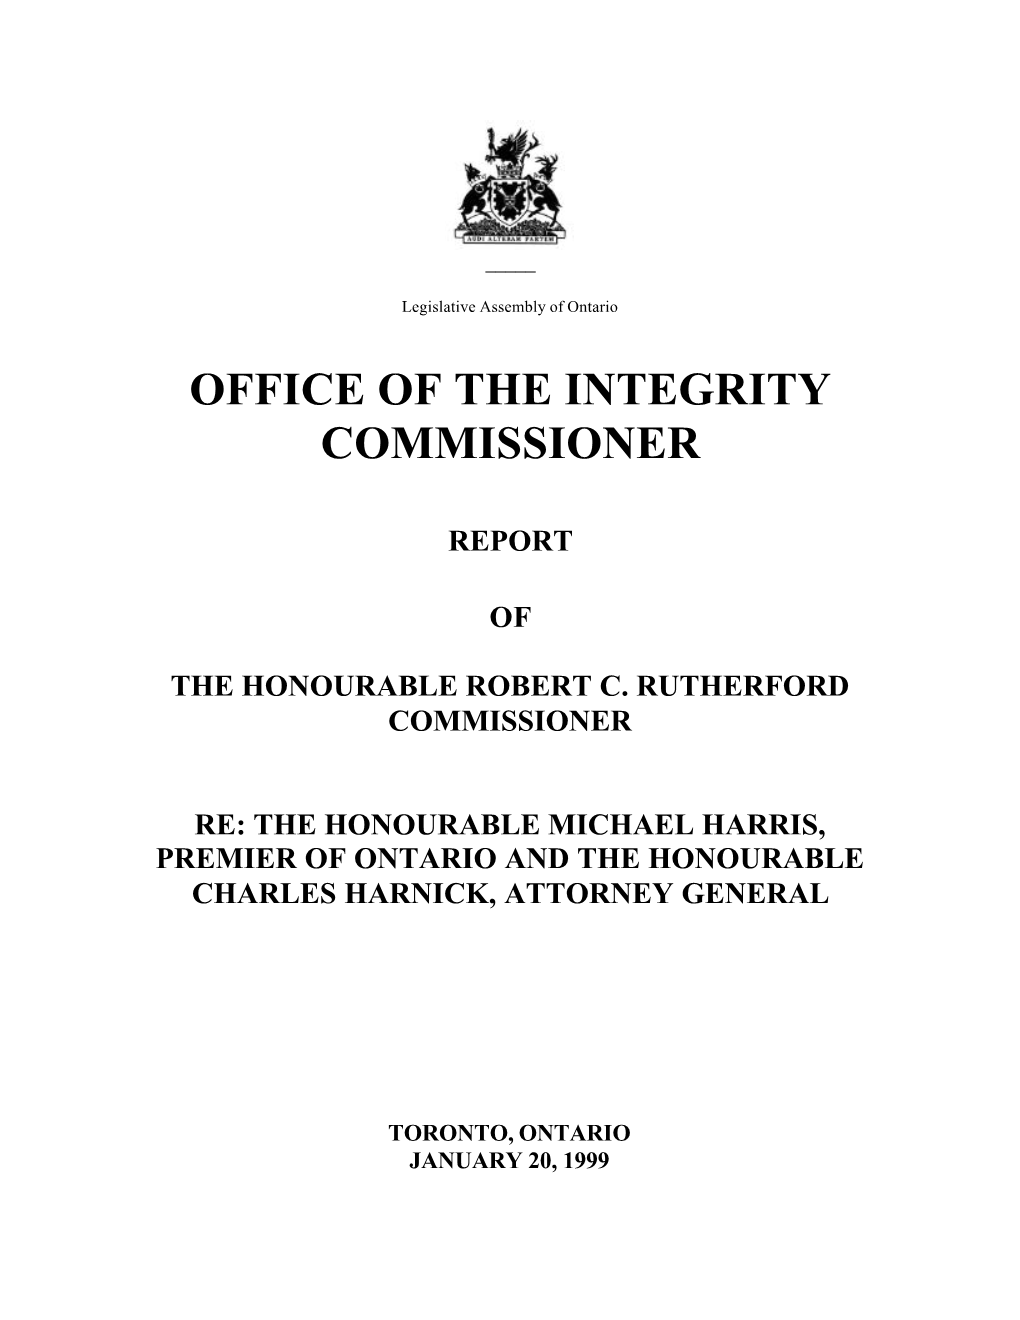 Office of the Integrity Commissioner